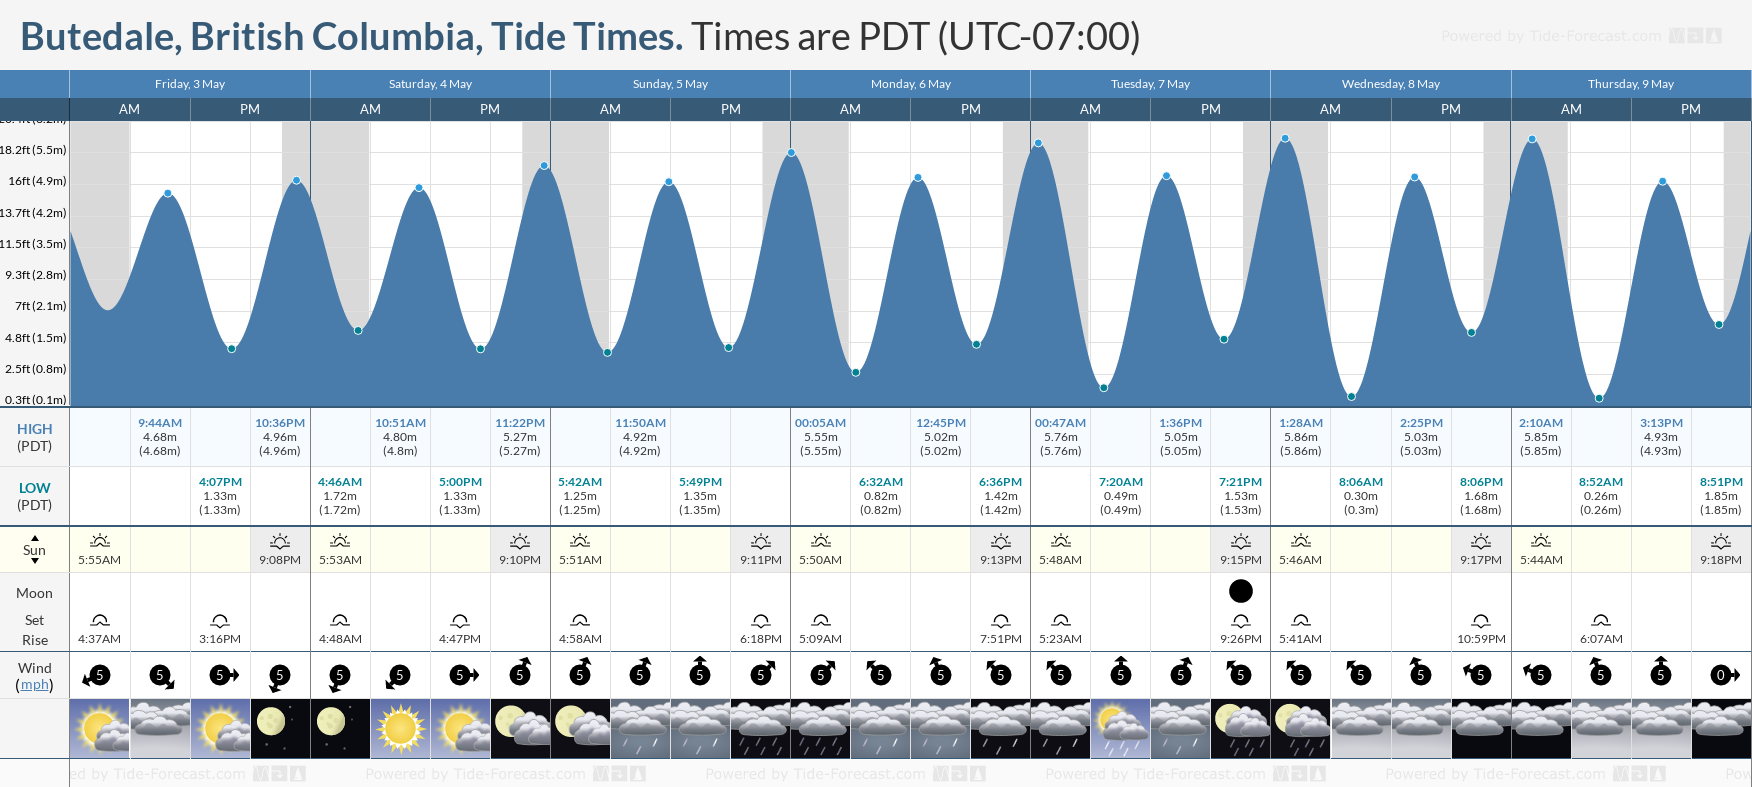 Butedale, British Columbia Tide Chart including high and low tide tide times for the next 7 days